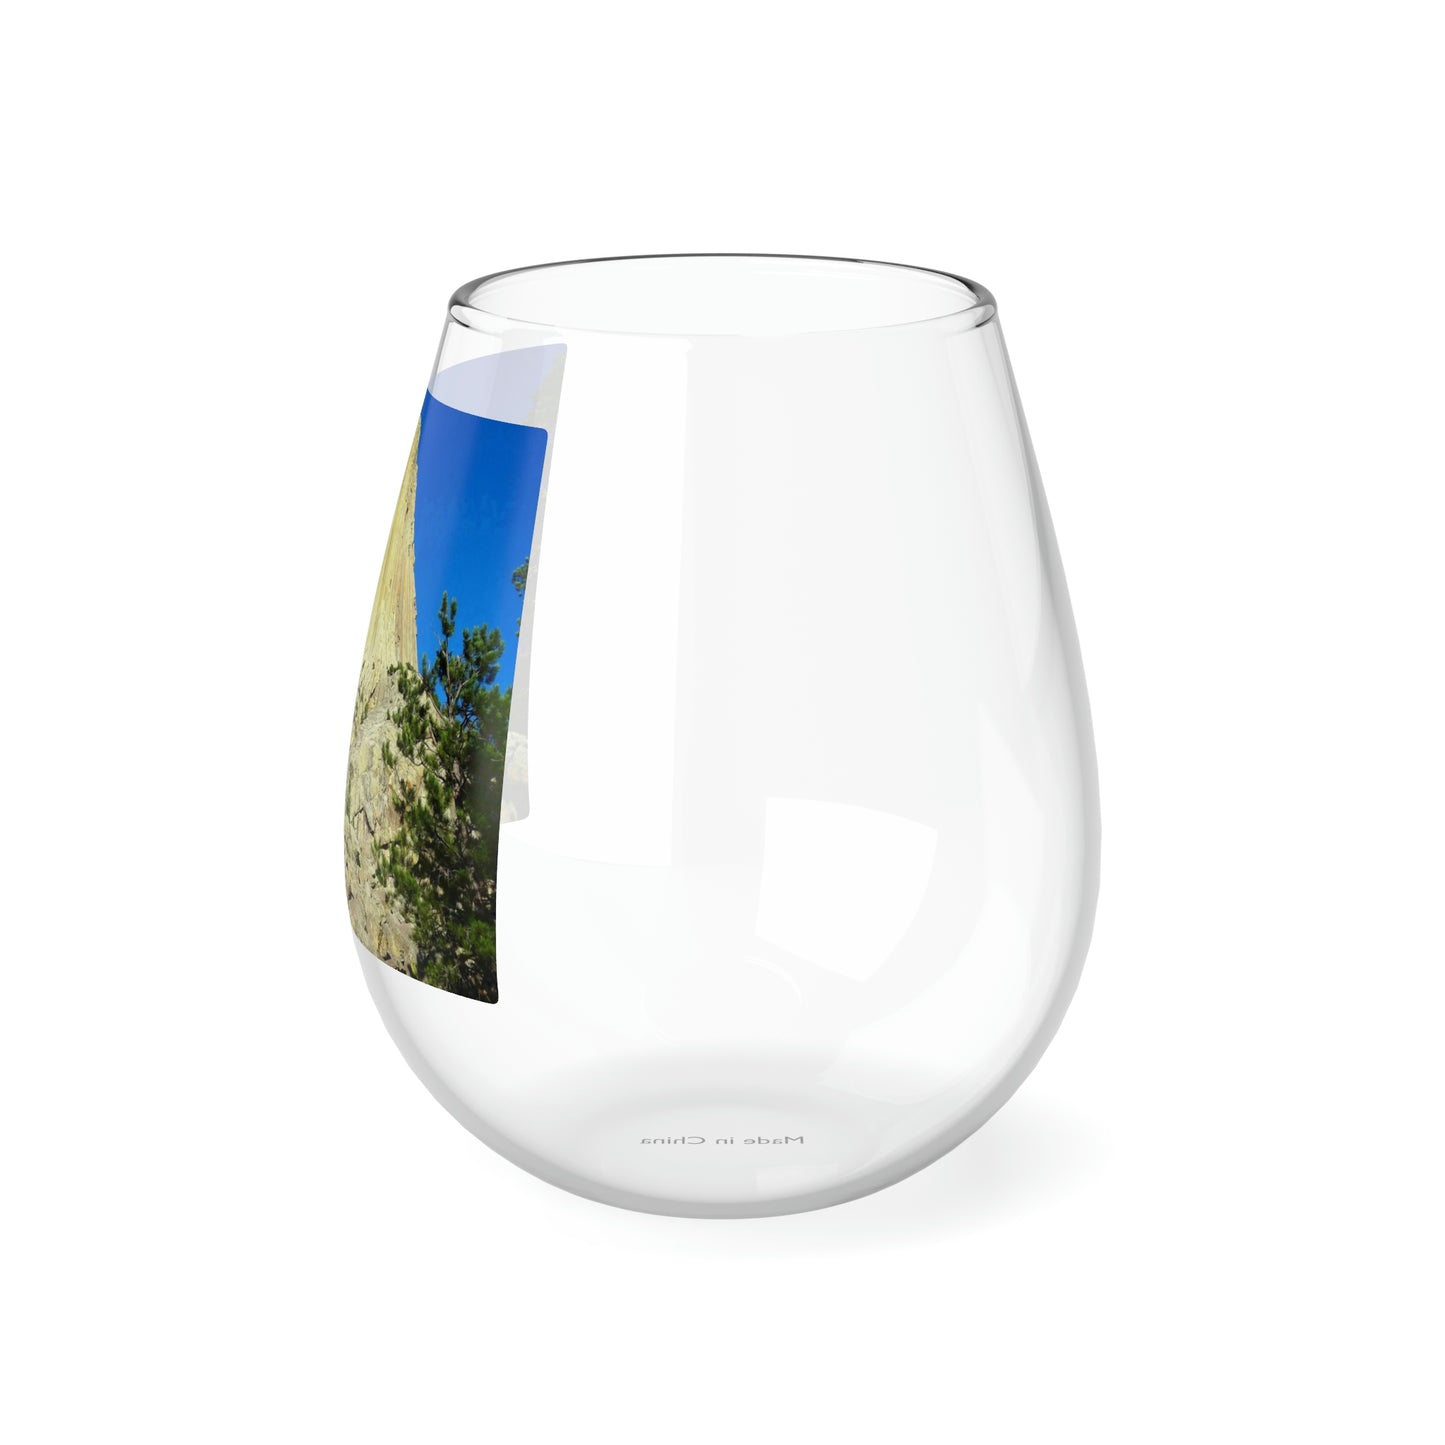 Reaching Heaven - Stemless Wine Glass, 11.75 oz - Fry1Productions